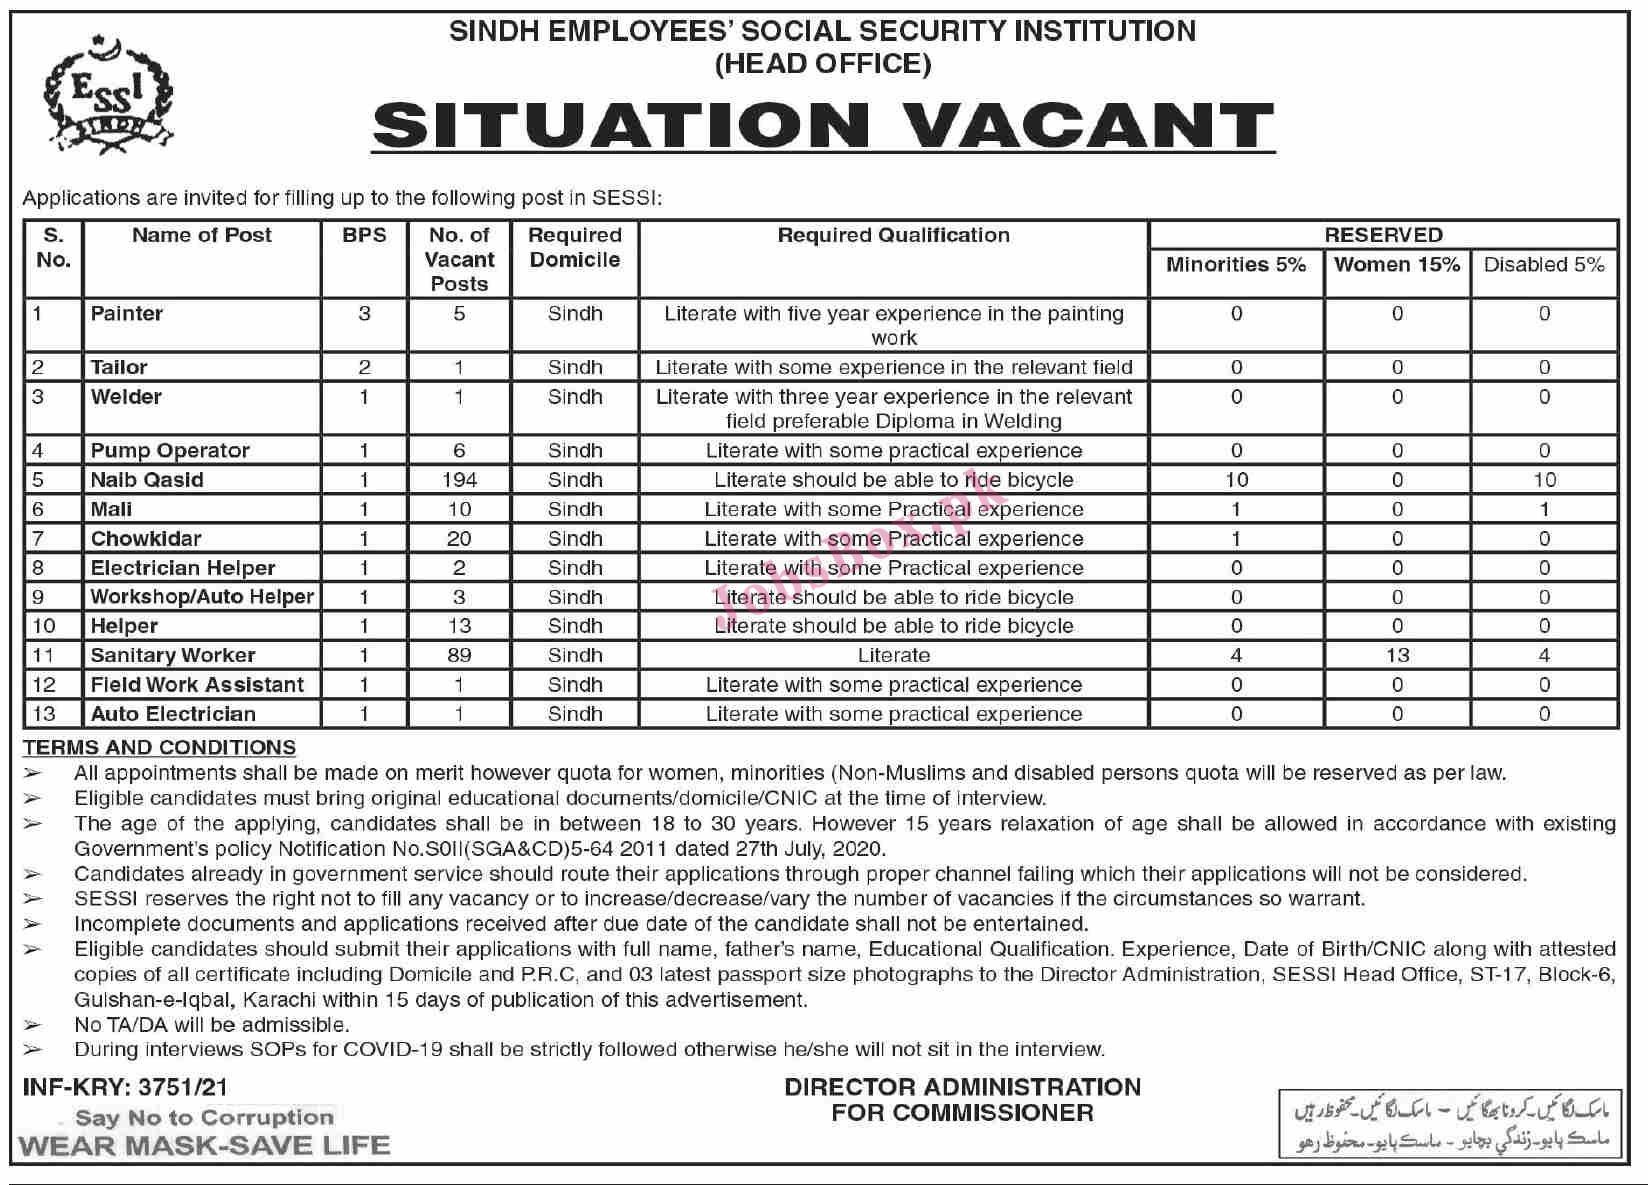 Latest Employees Social Security Institution ESSI Sindh Jobs 2021